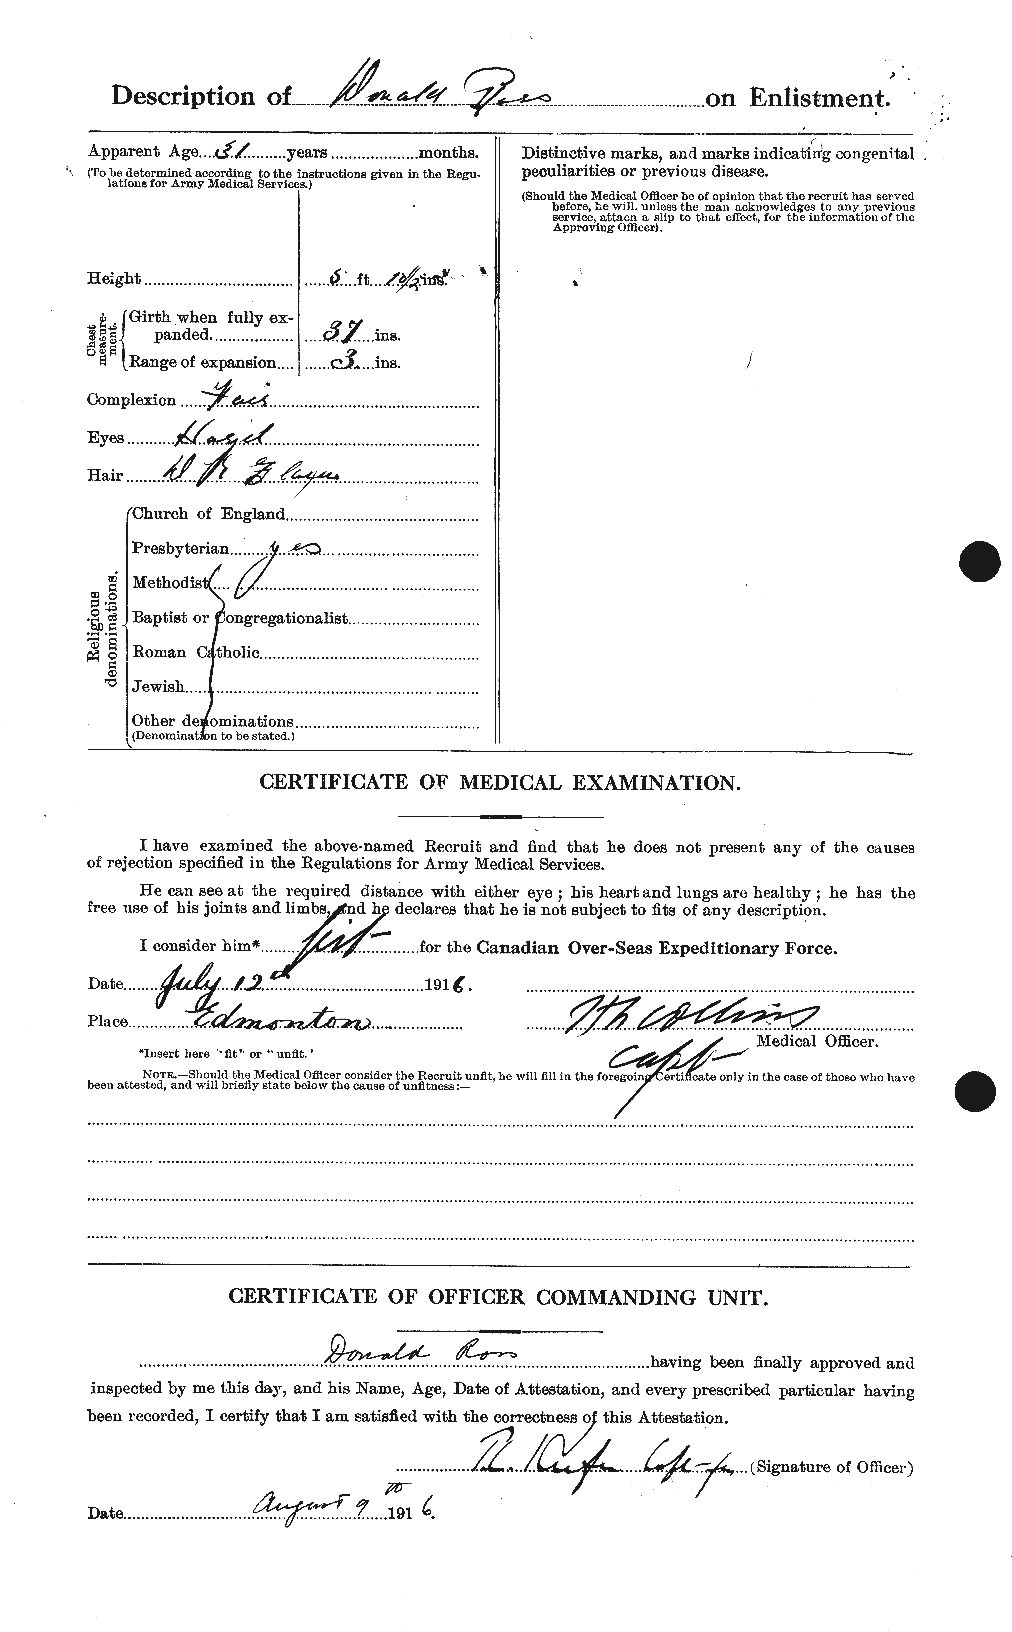 Personnel Records of the First World War - CEF 612859b